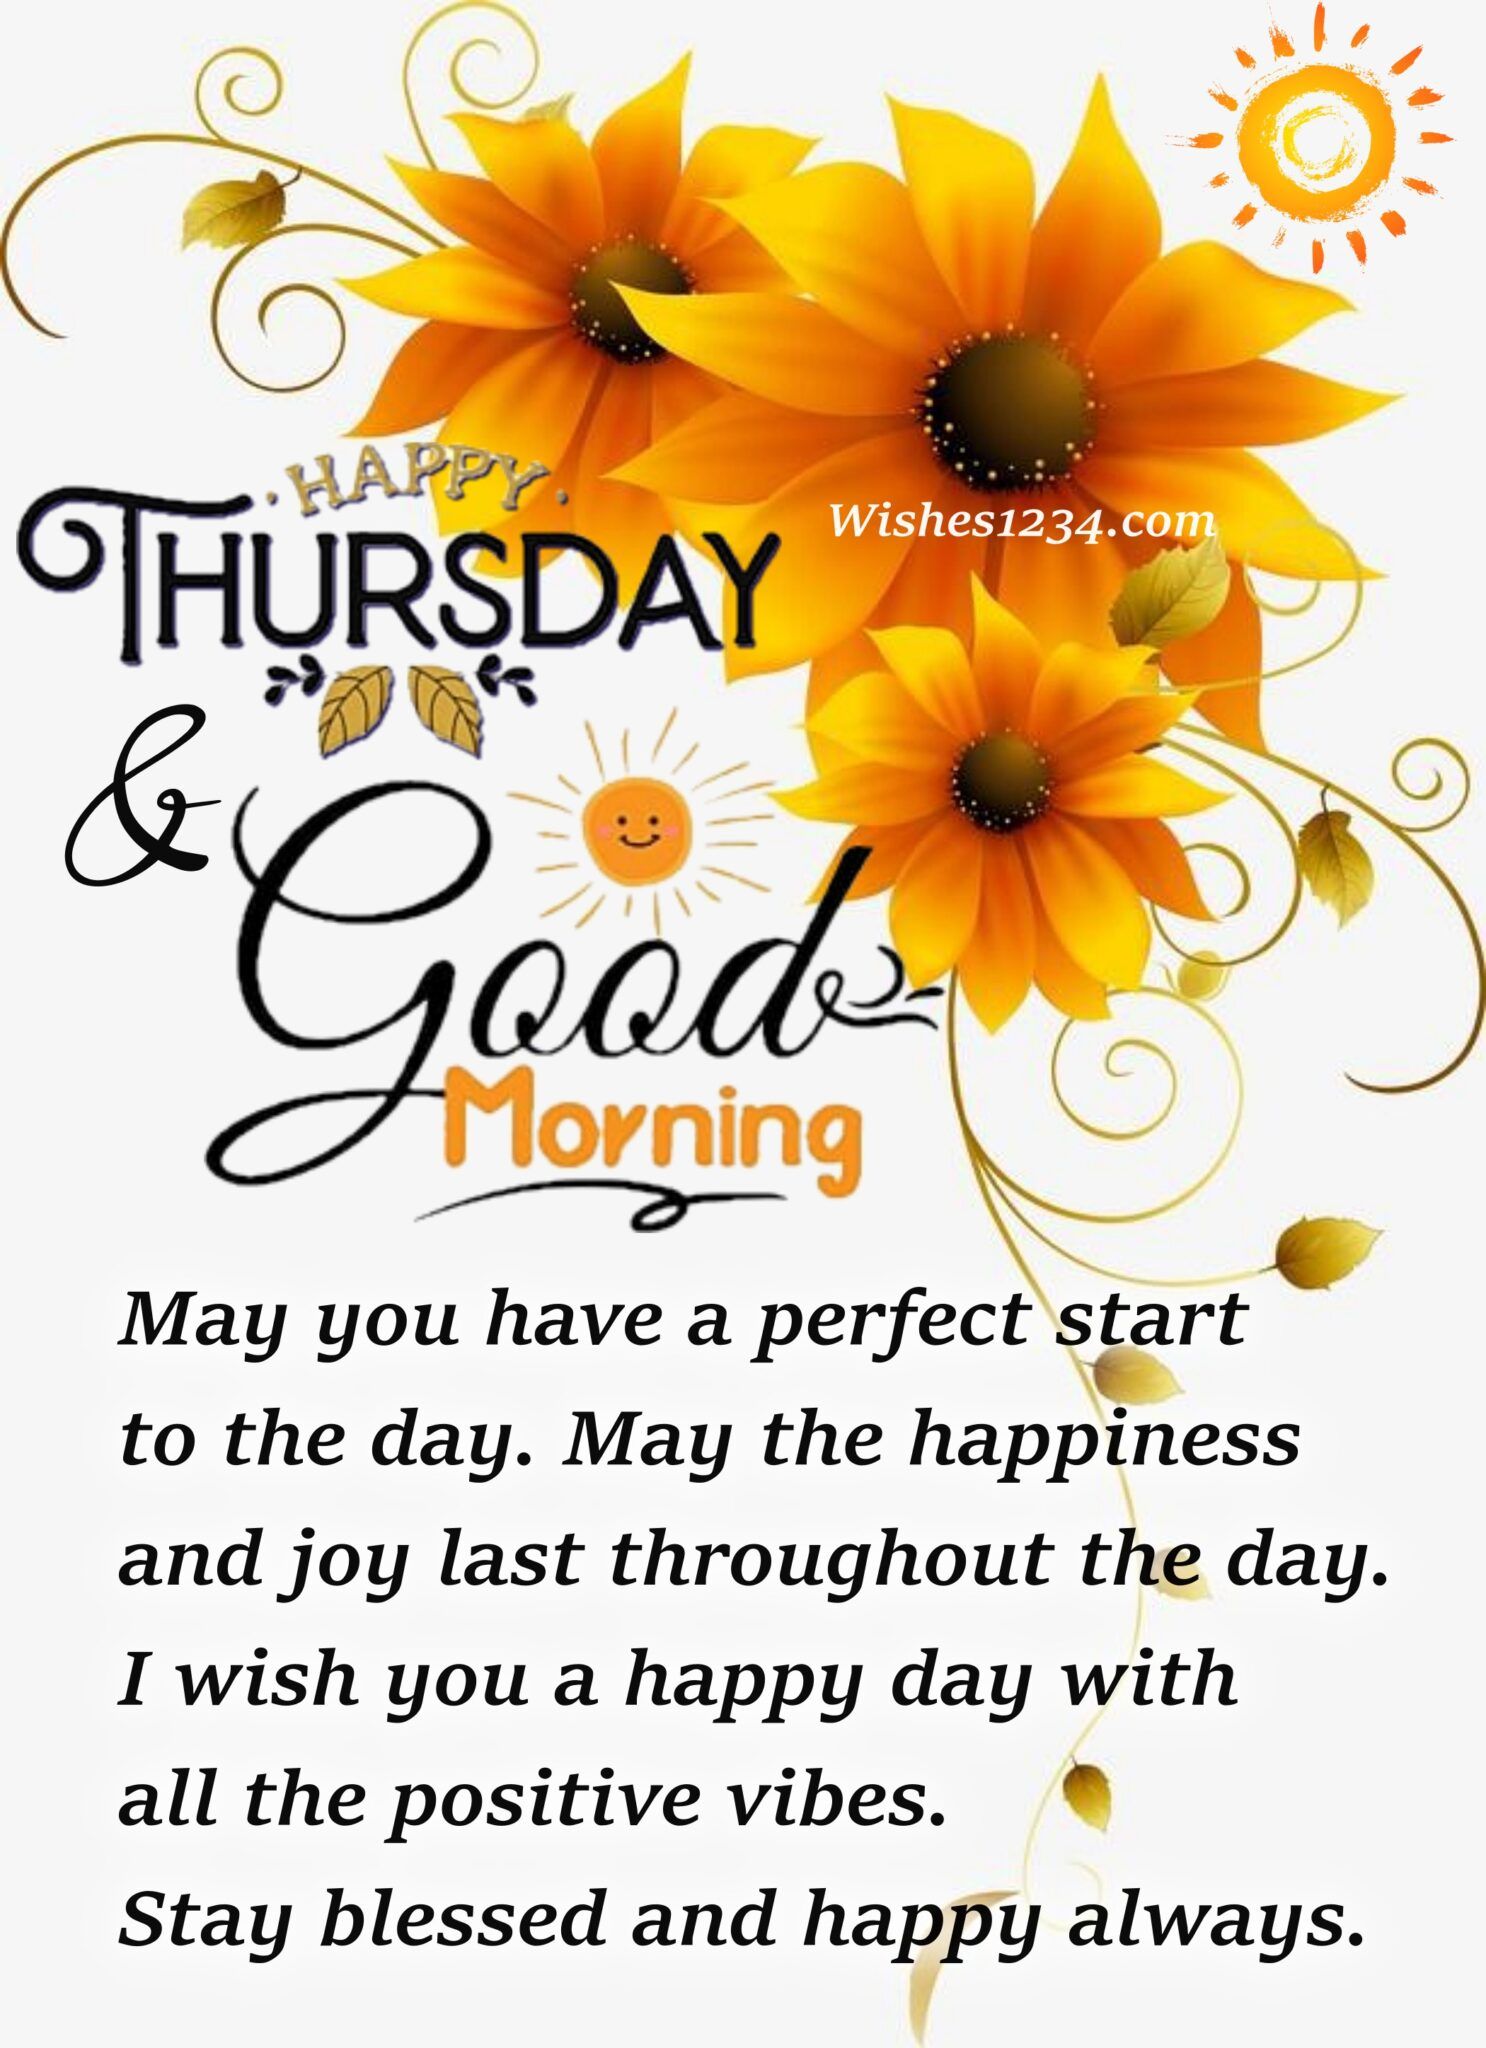 50+ Thursday morning quotes and Thursday blessings with images